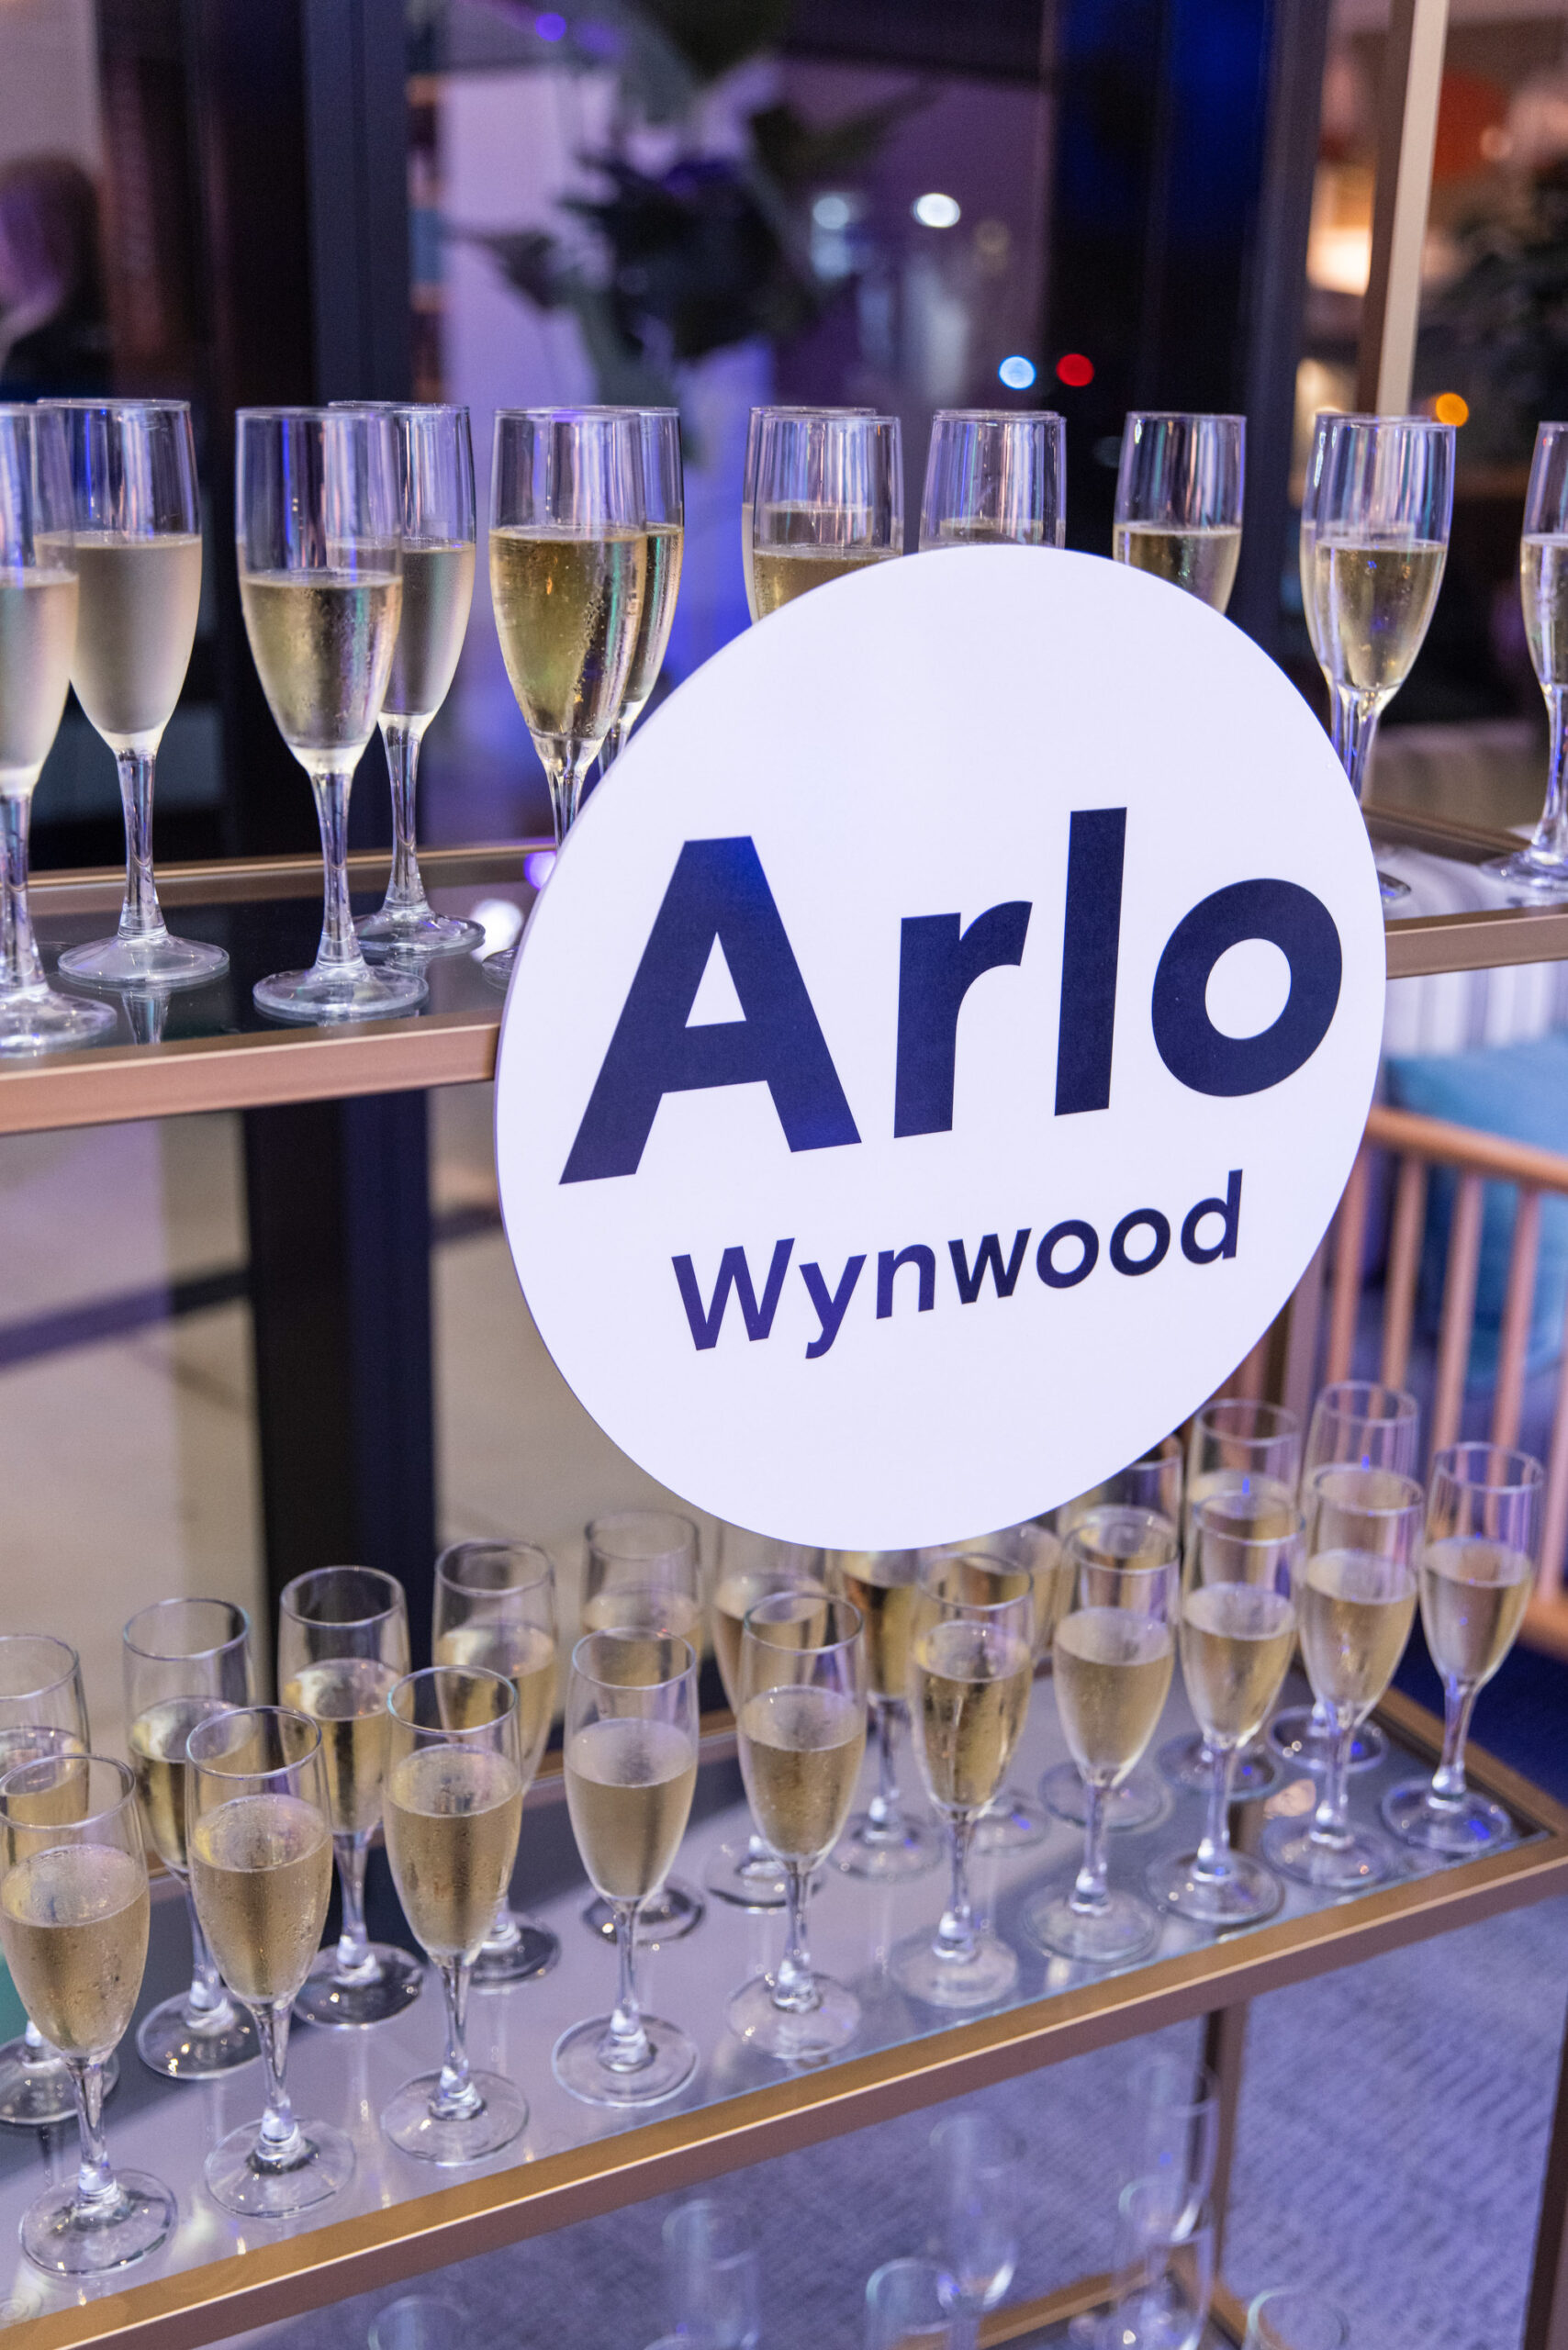 A display of champagne glasses on a bar cart at an event, with a circular sign reading "Arlo Wynwood" in the foreground.